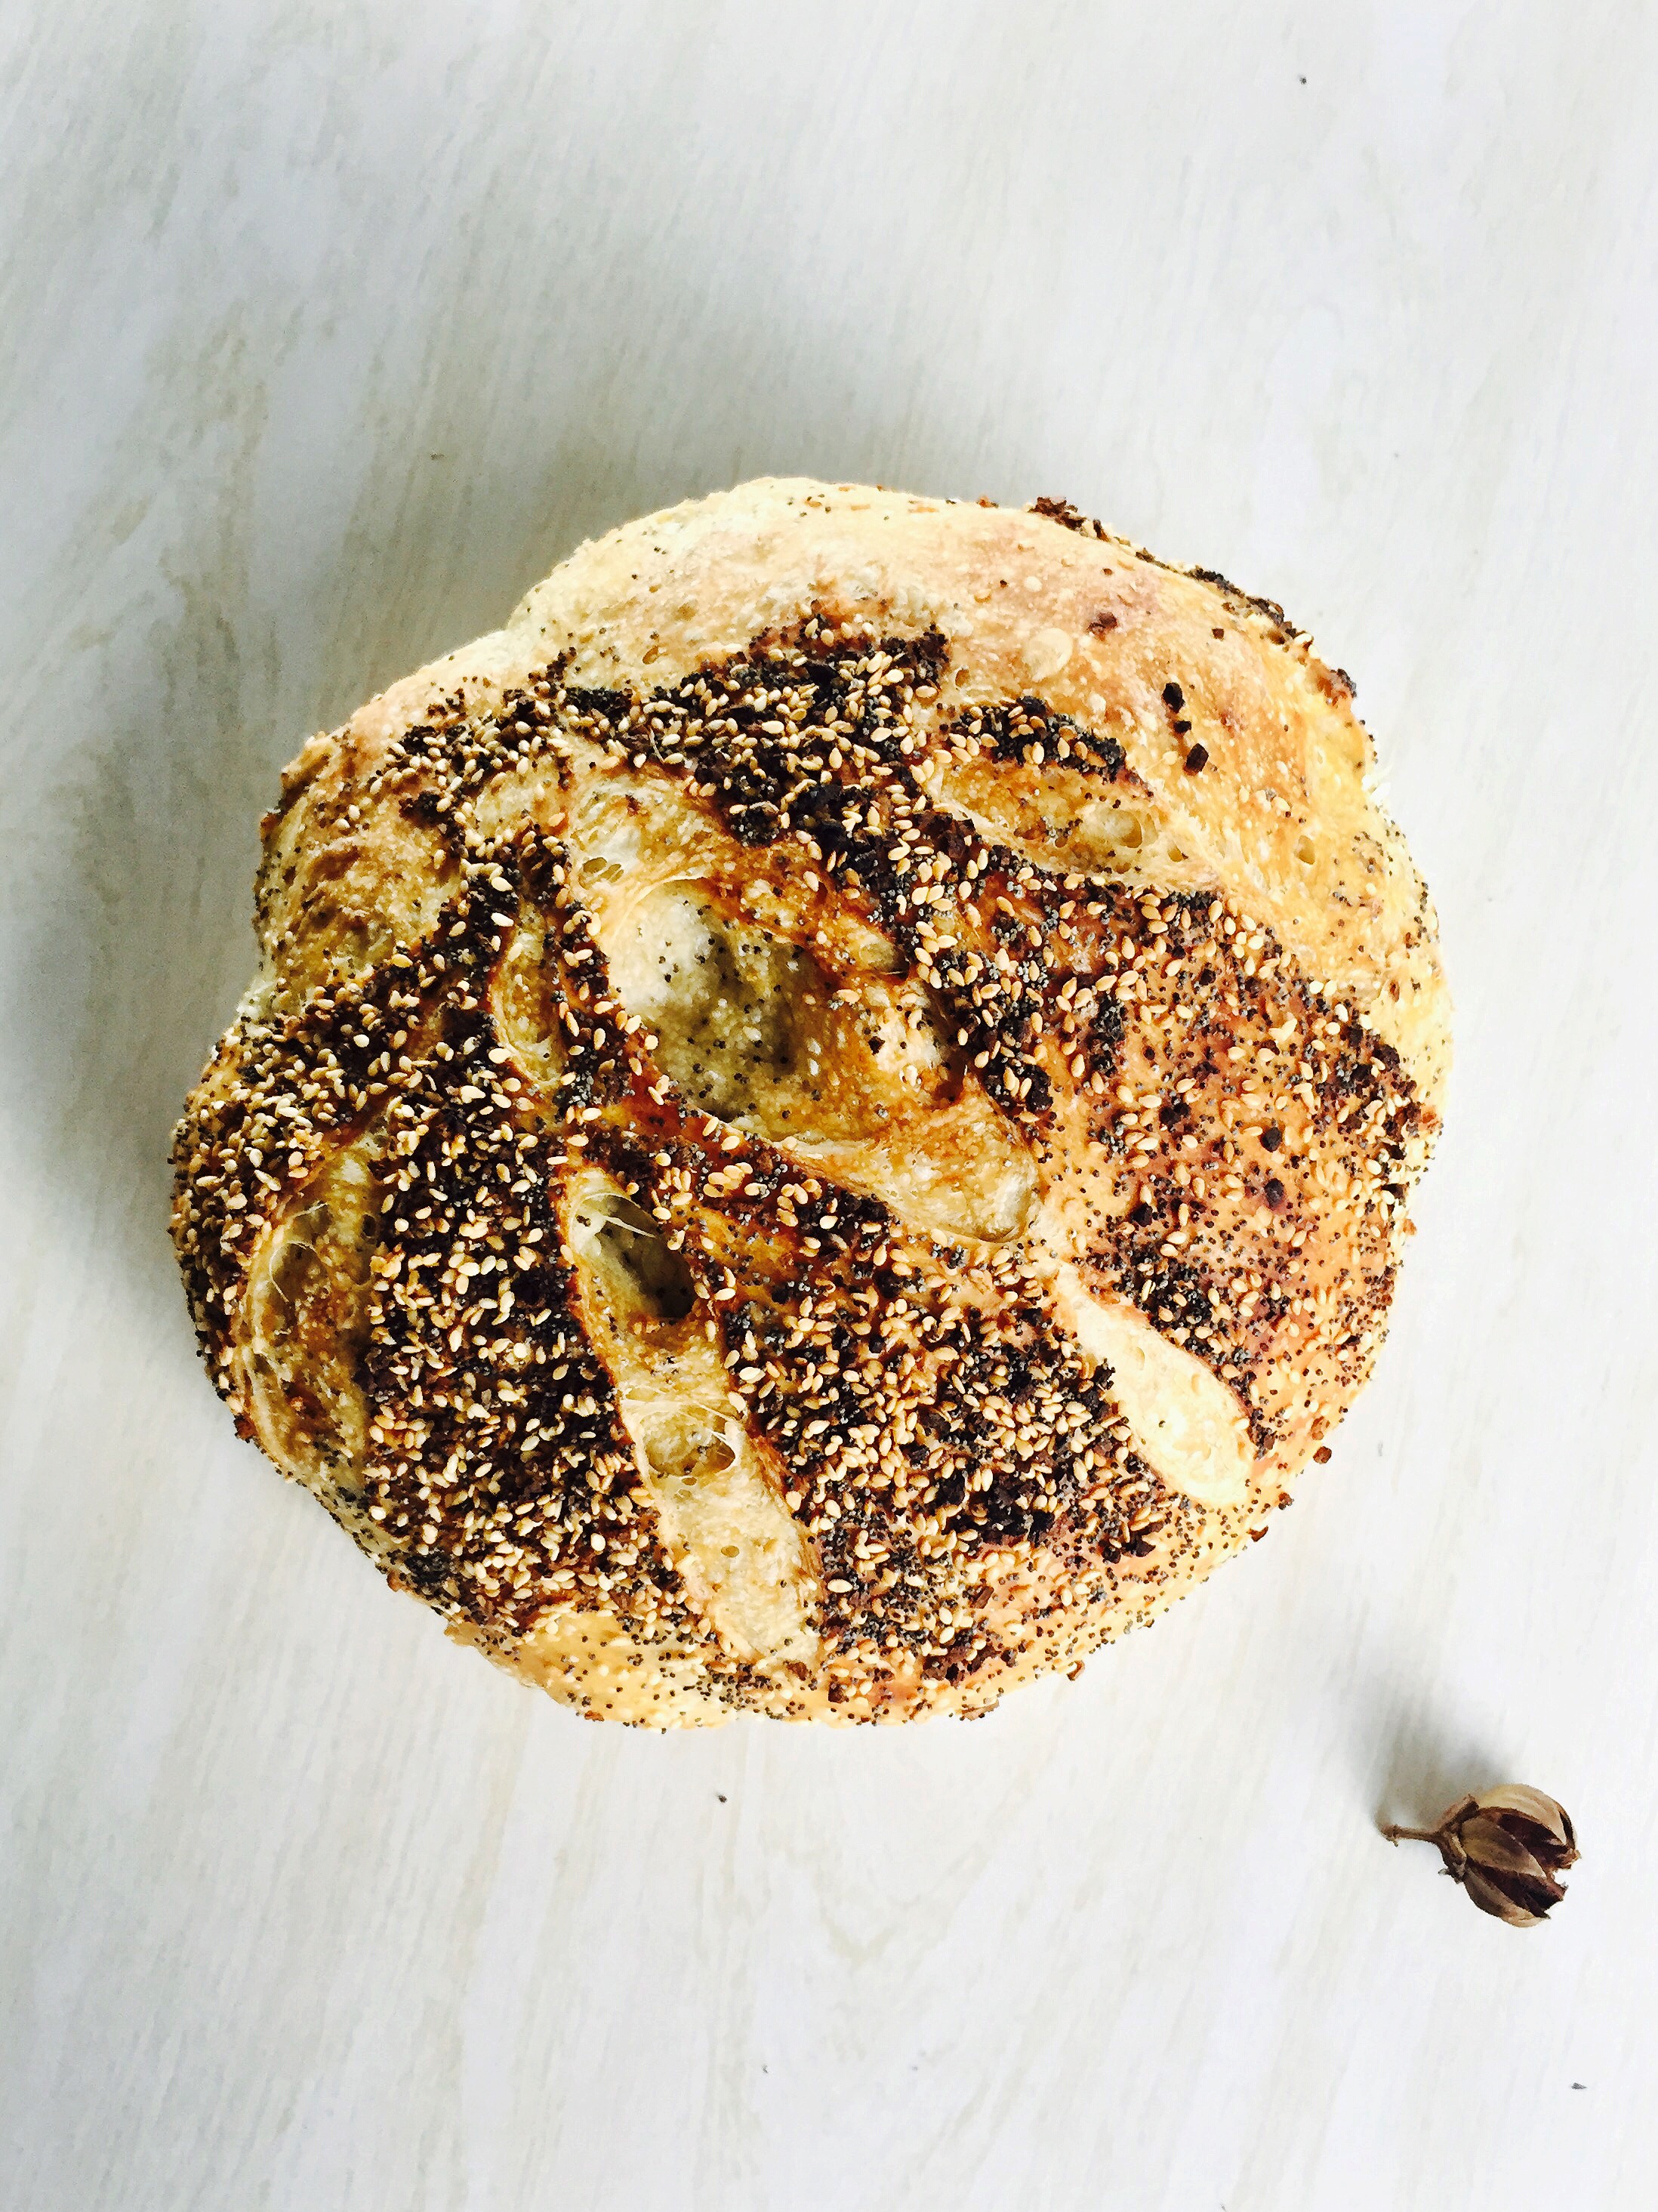 Homeade Bread with Seeds.jpg